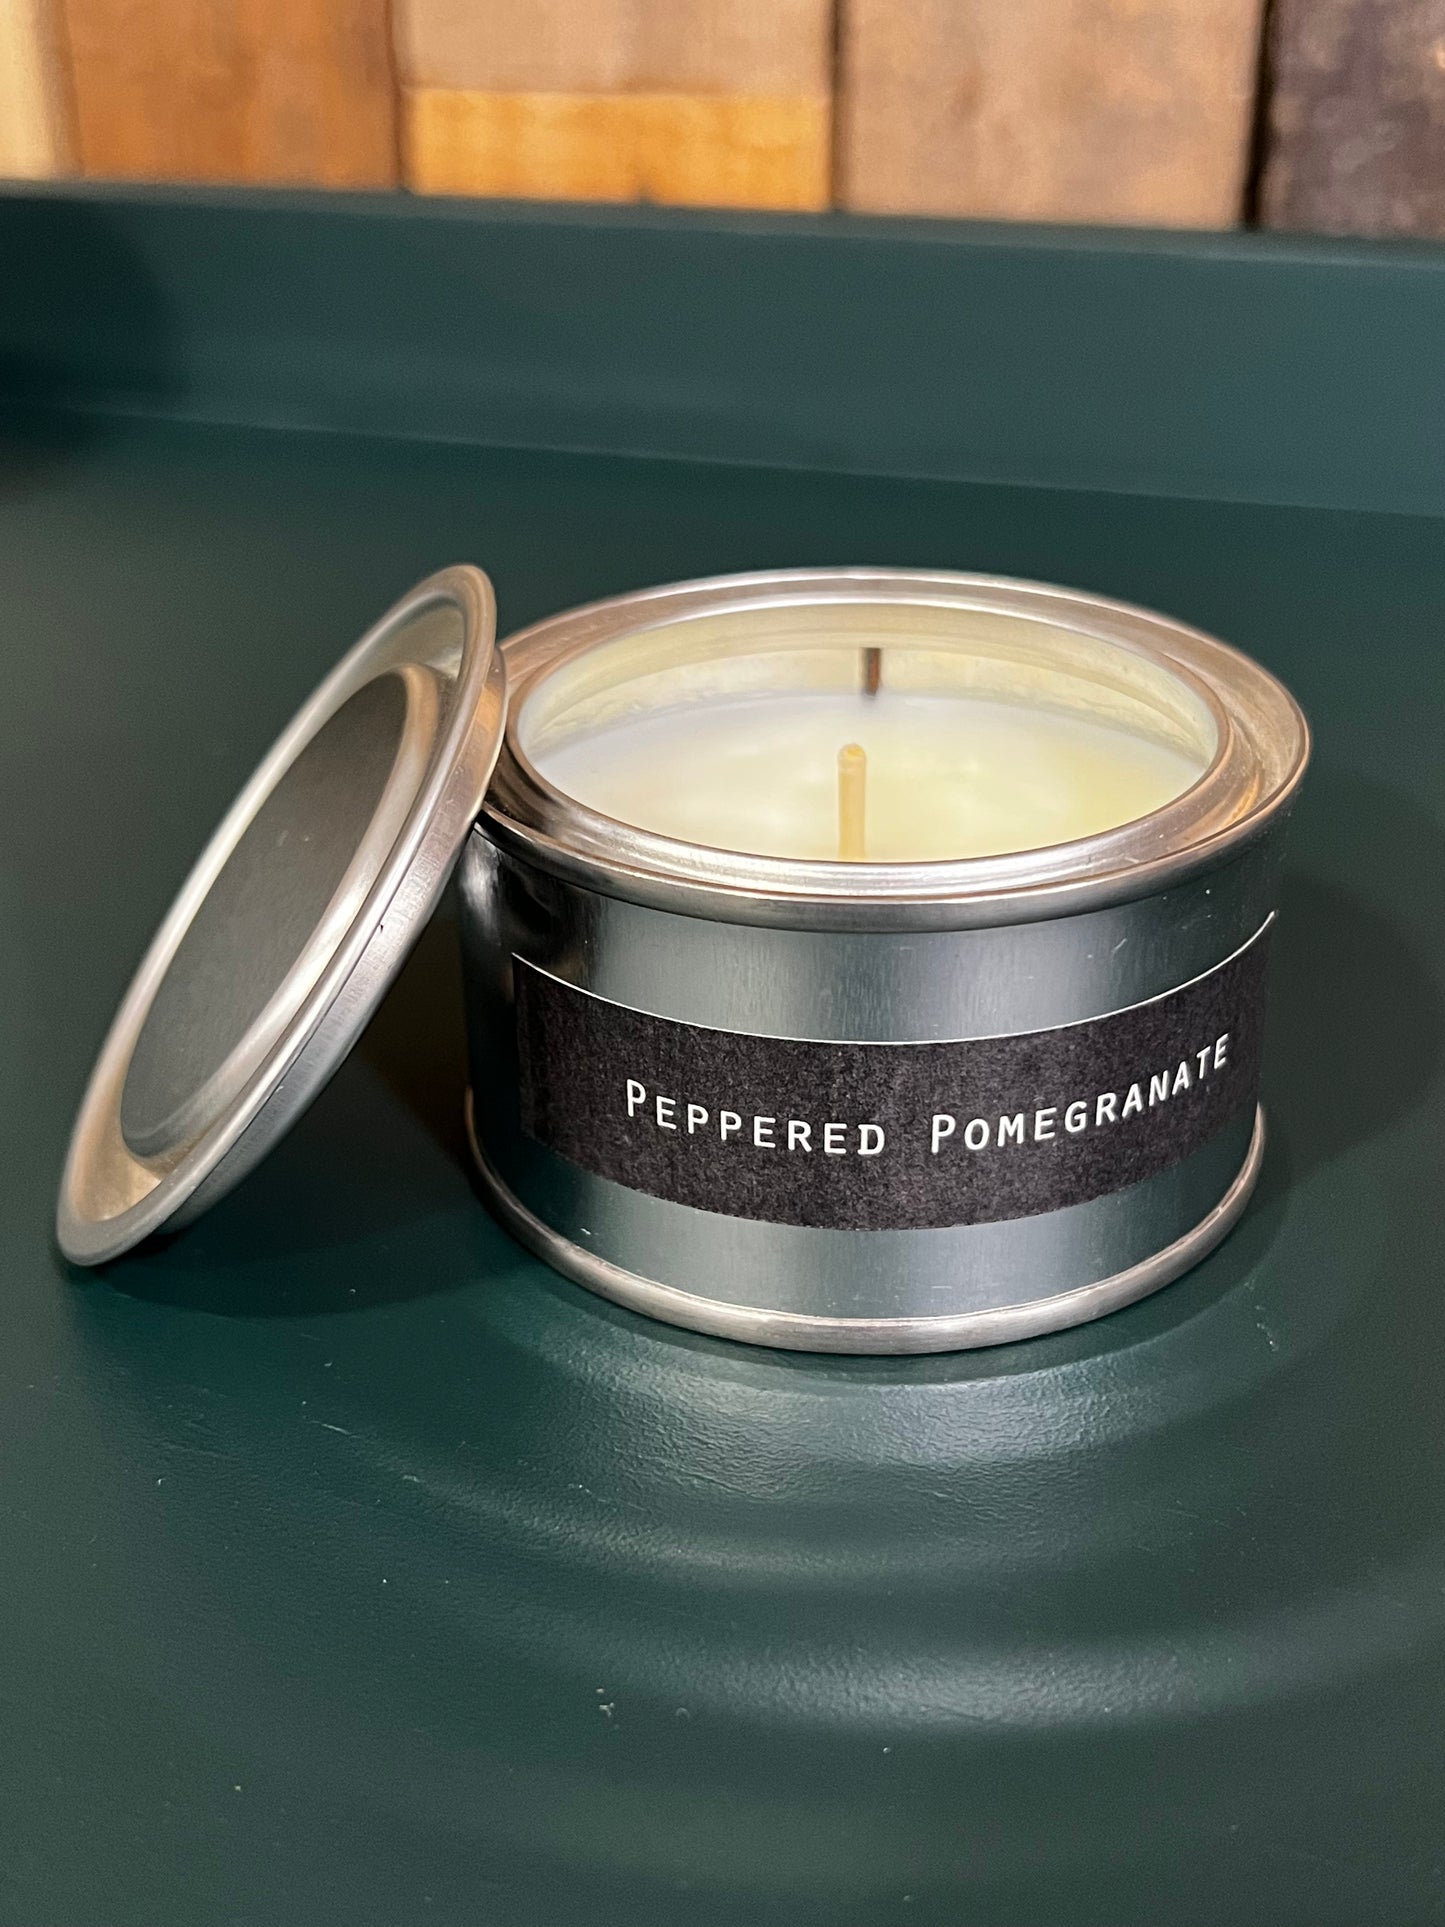 Peppered Pomegranate candle